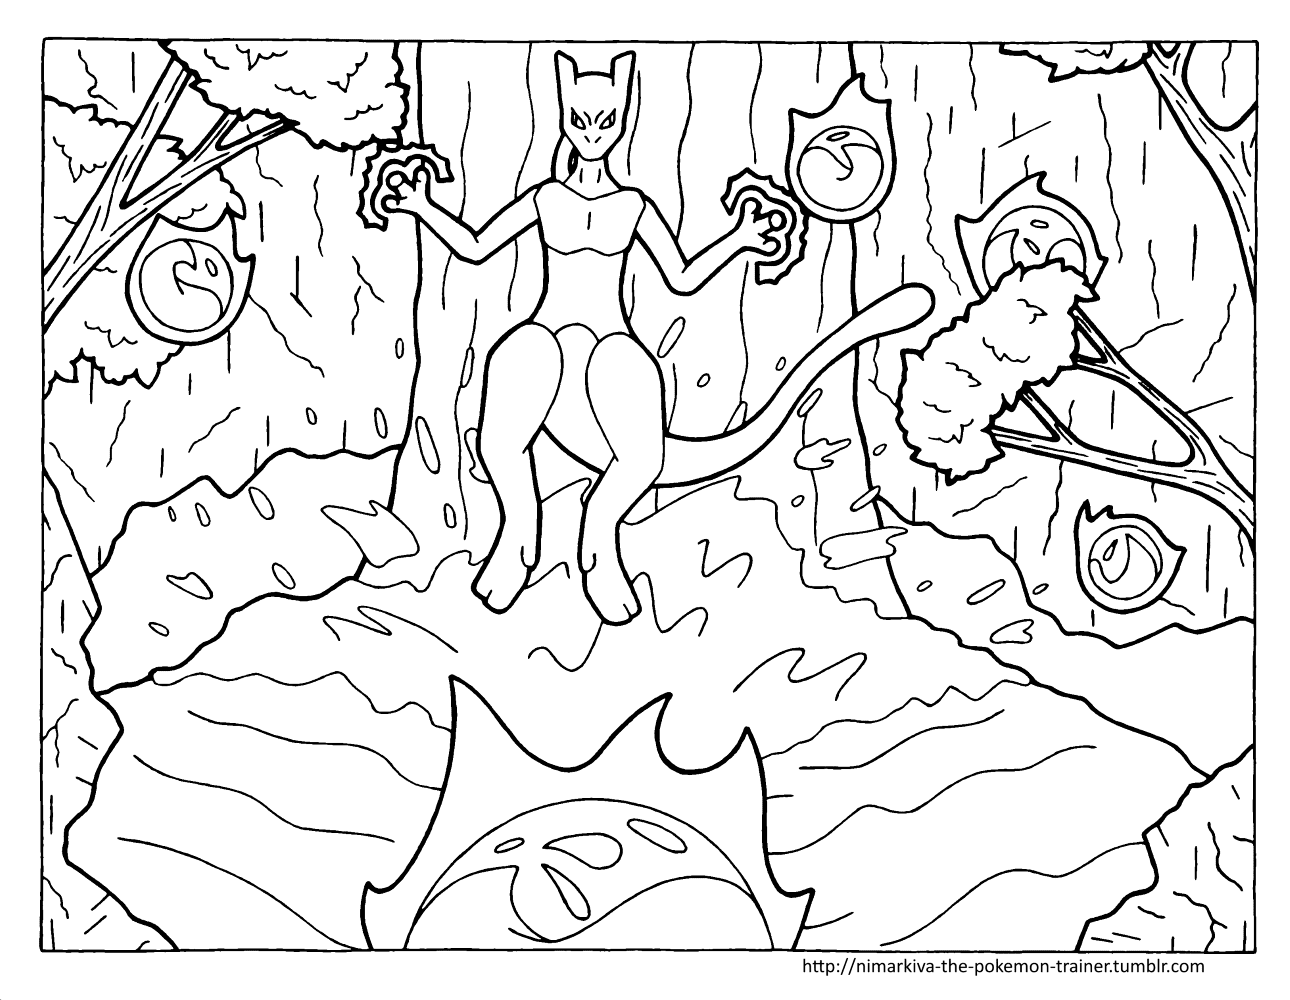 Mewtwo At The Waterfall Coloring Page